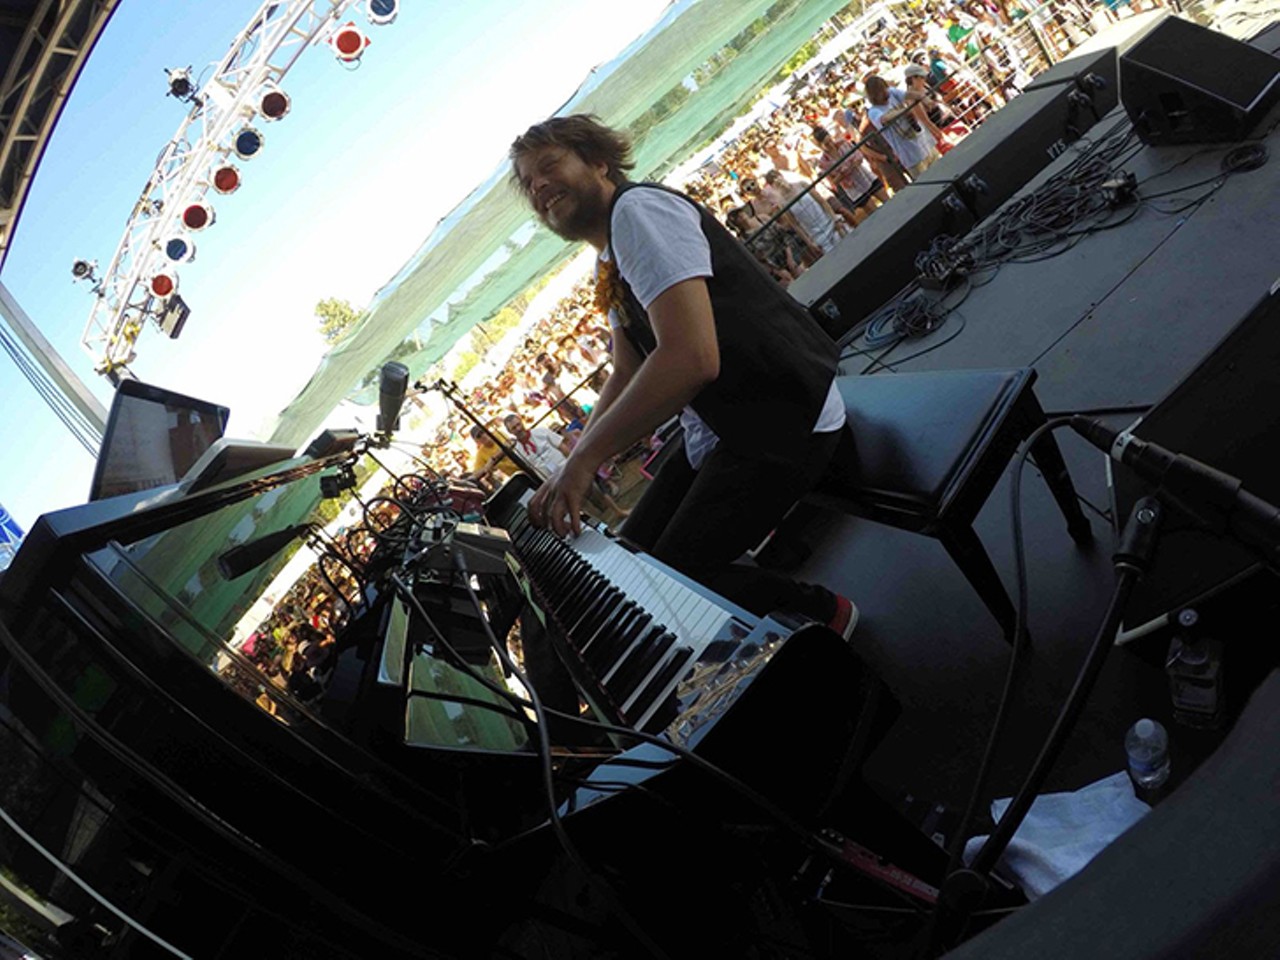 Friday, Jan. 15Marco Benevento at the Annie Russell Theatre, Rollins College